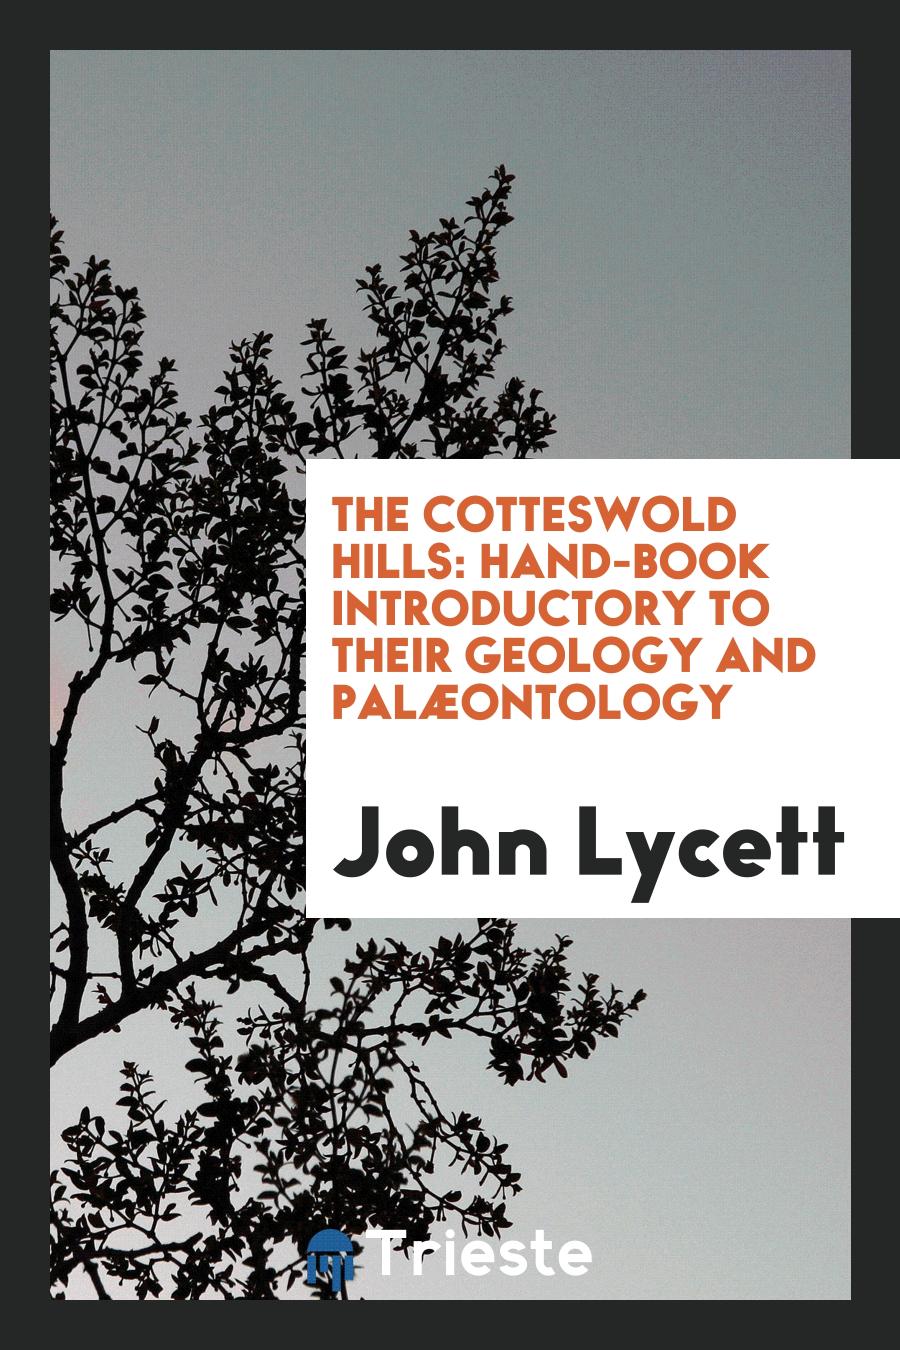 The Cotteswold Hills: Hand-Book Introductory to Their Geology and Palæontology